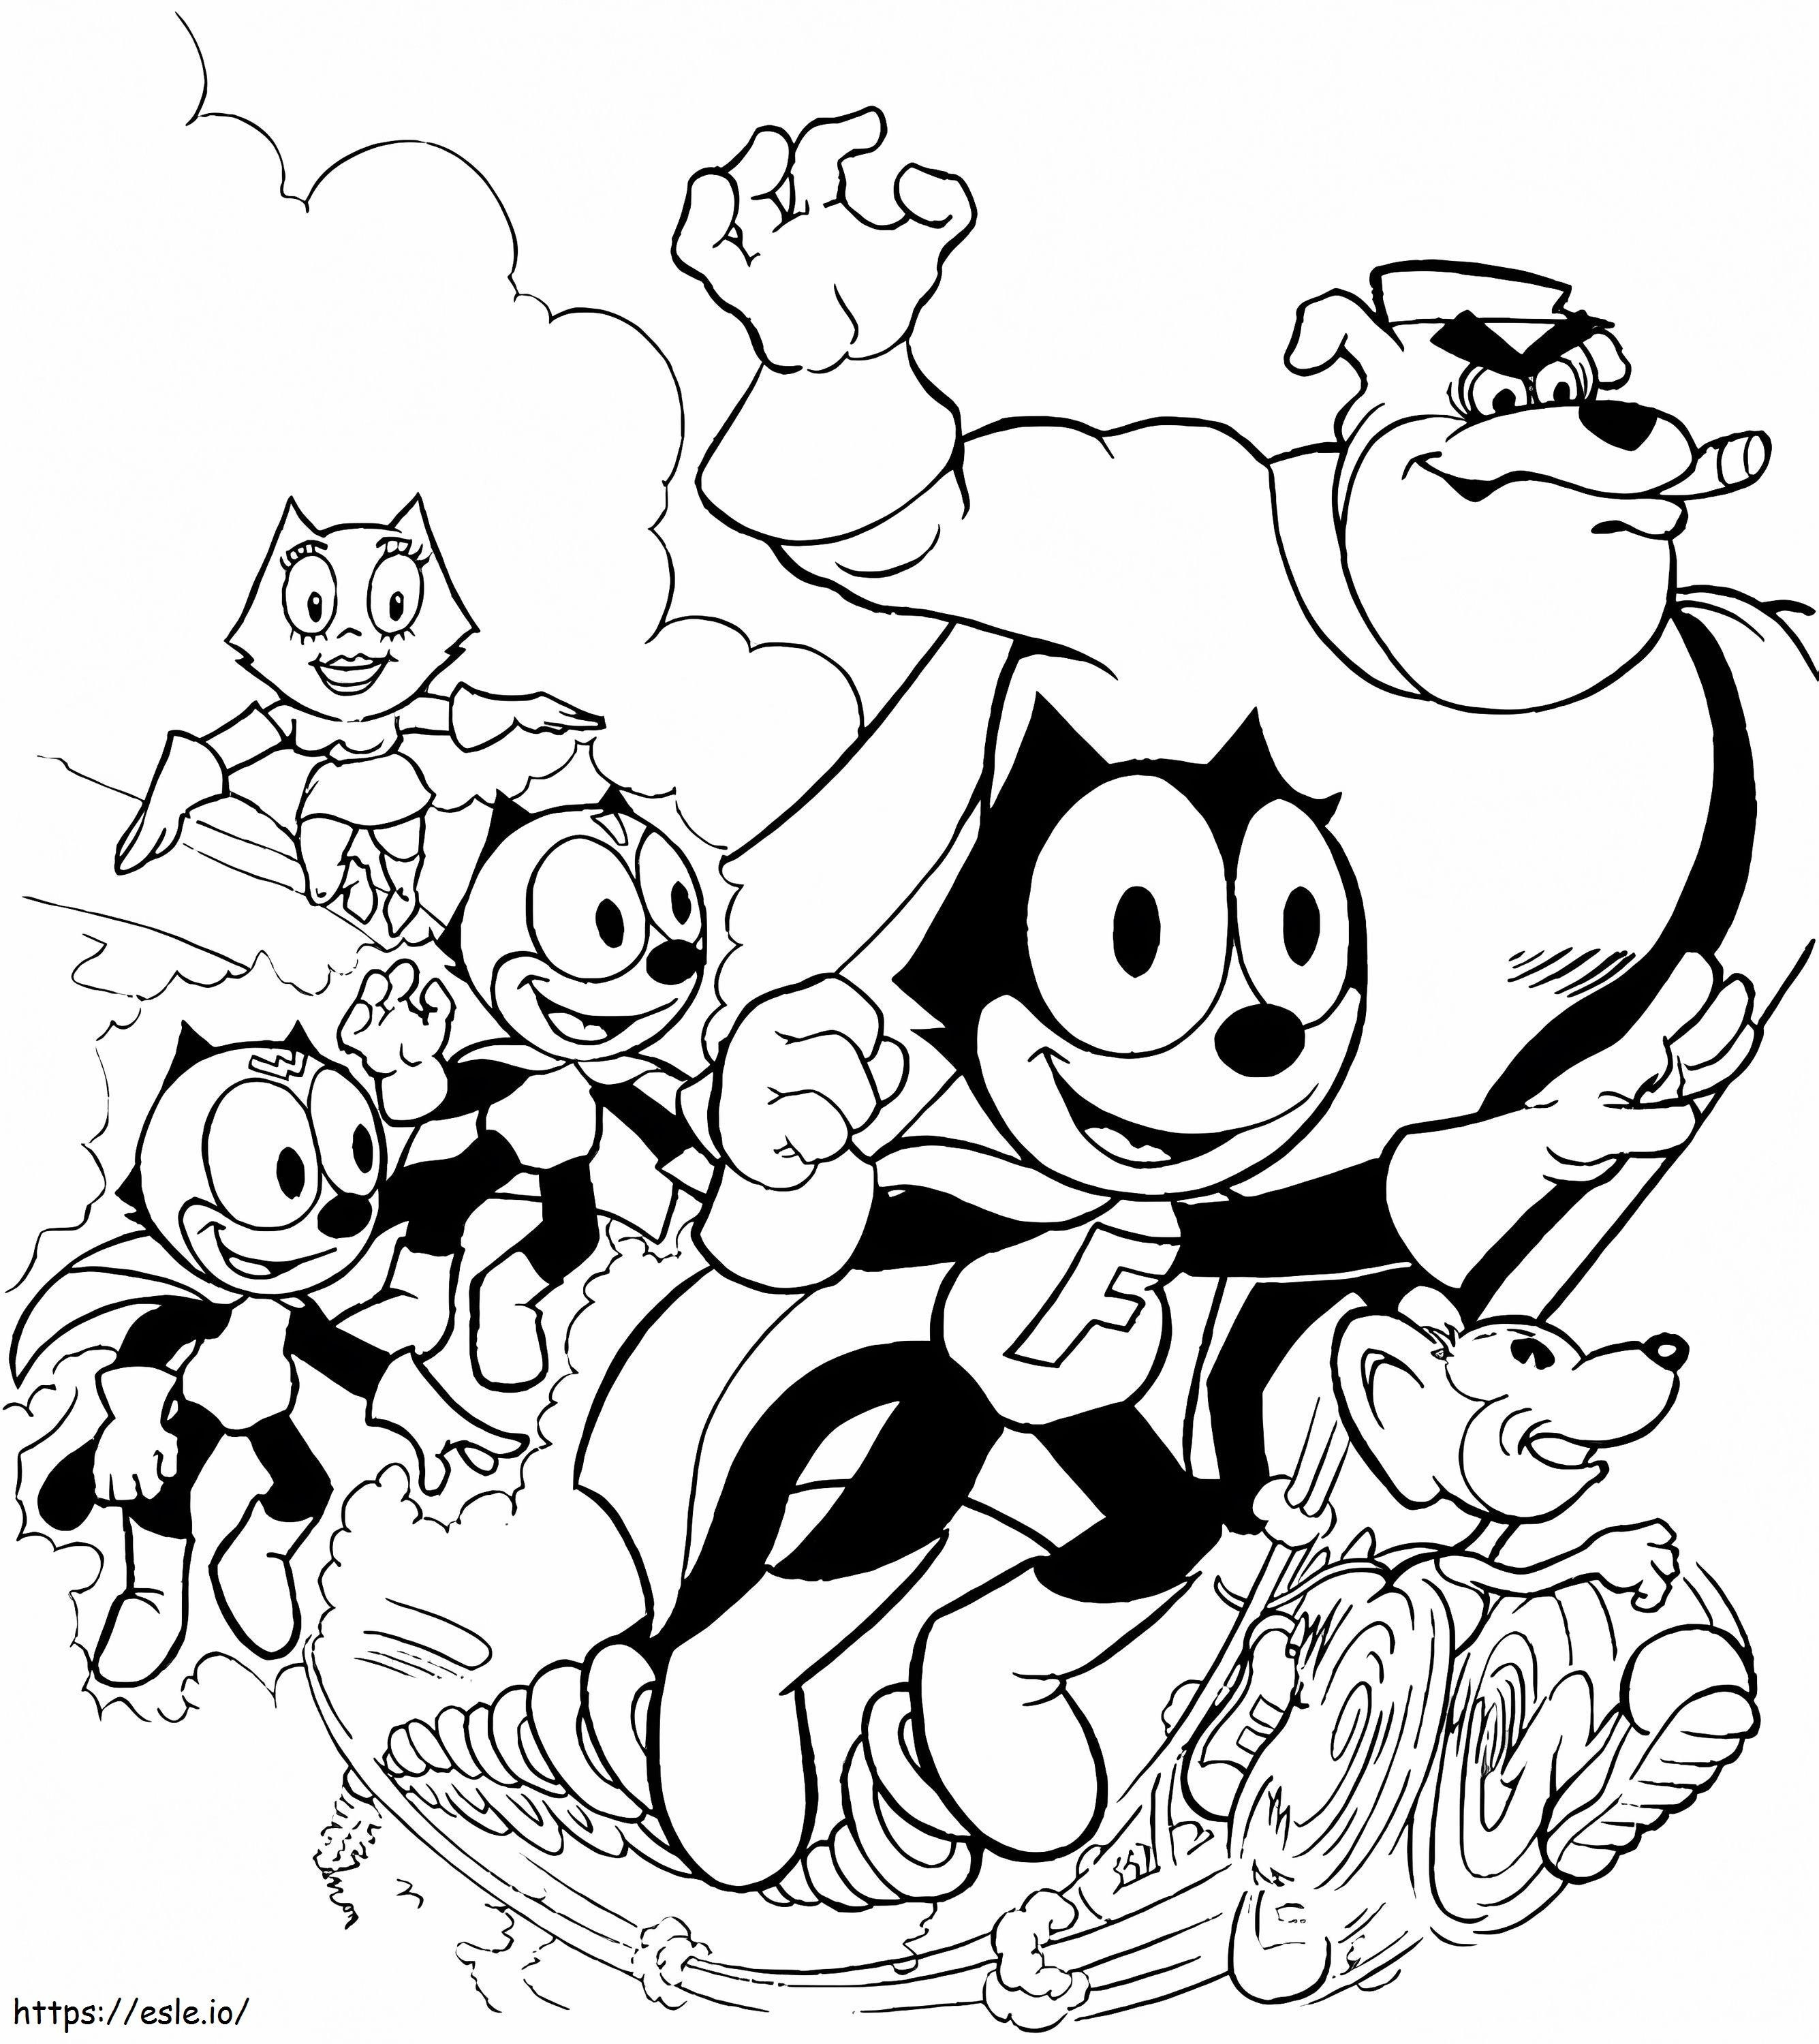 Felix The Cat Squad coloring page